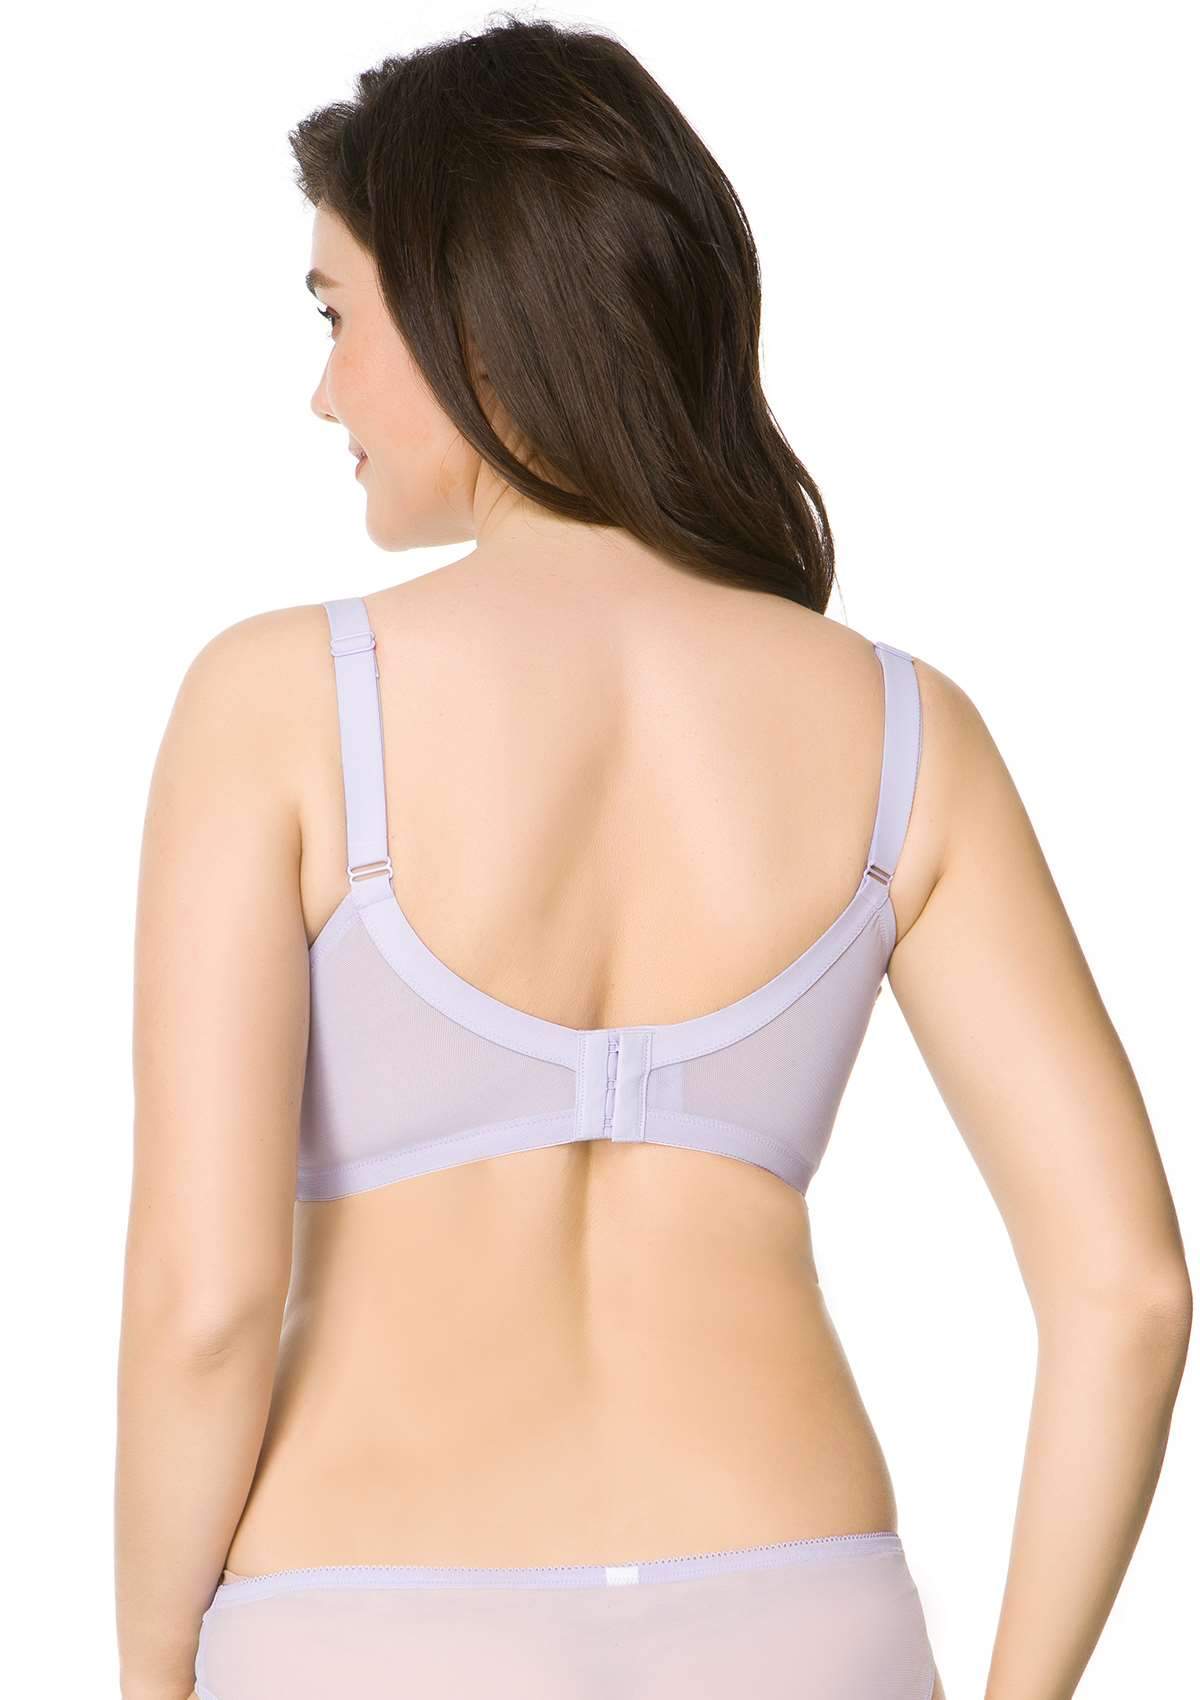 HSIA Wisteria Bra For Lift And Support - Full Coverage Minimizer Bra - Light Pink / 36 / D